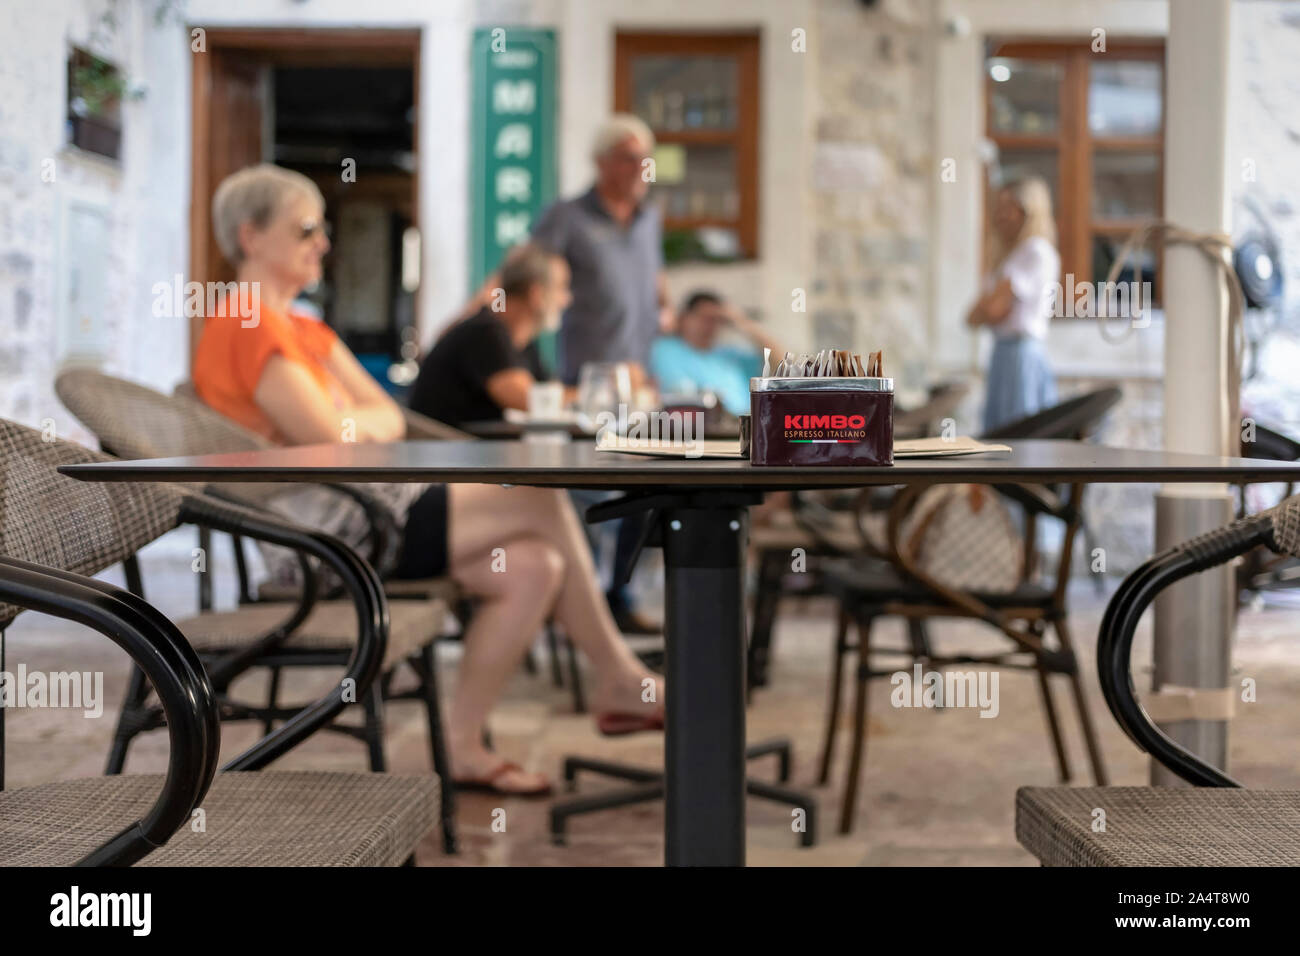 Montenegro, Sep 16, 2019: Street scene with guests sitting at an outdoor cafe in the Old Town of Kotor Stock Photo